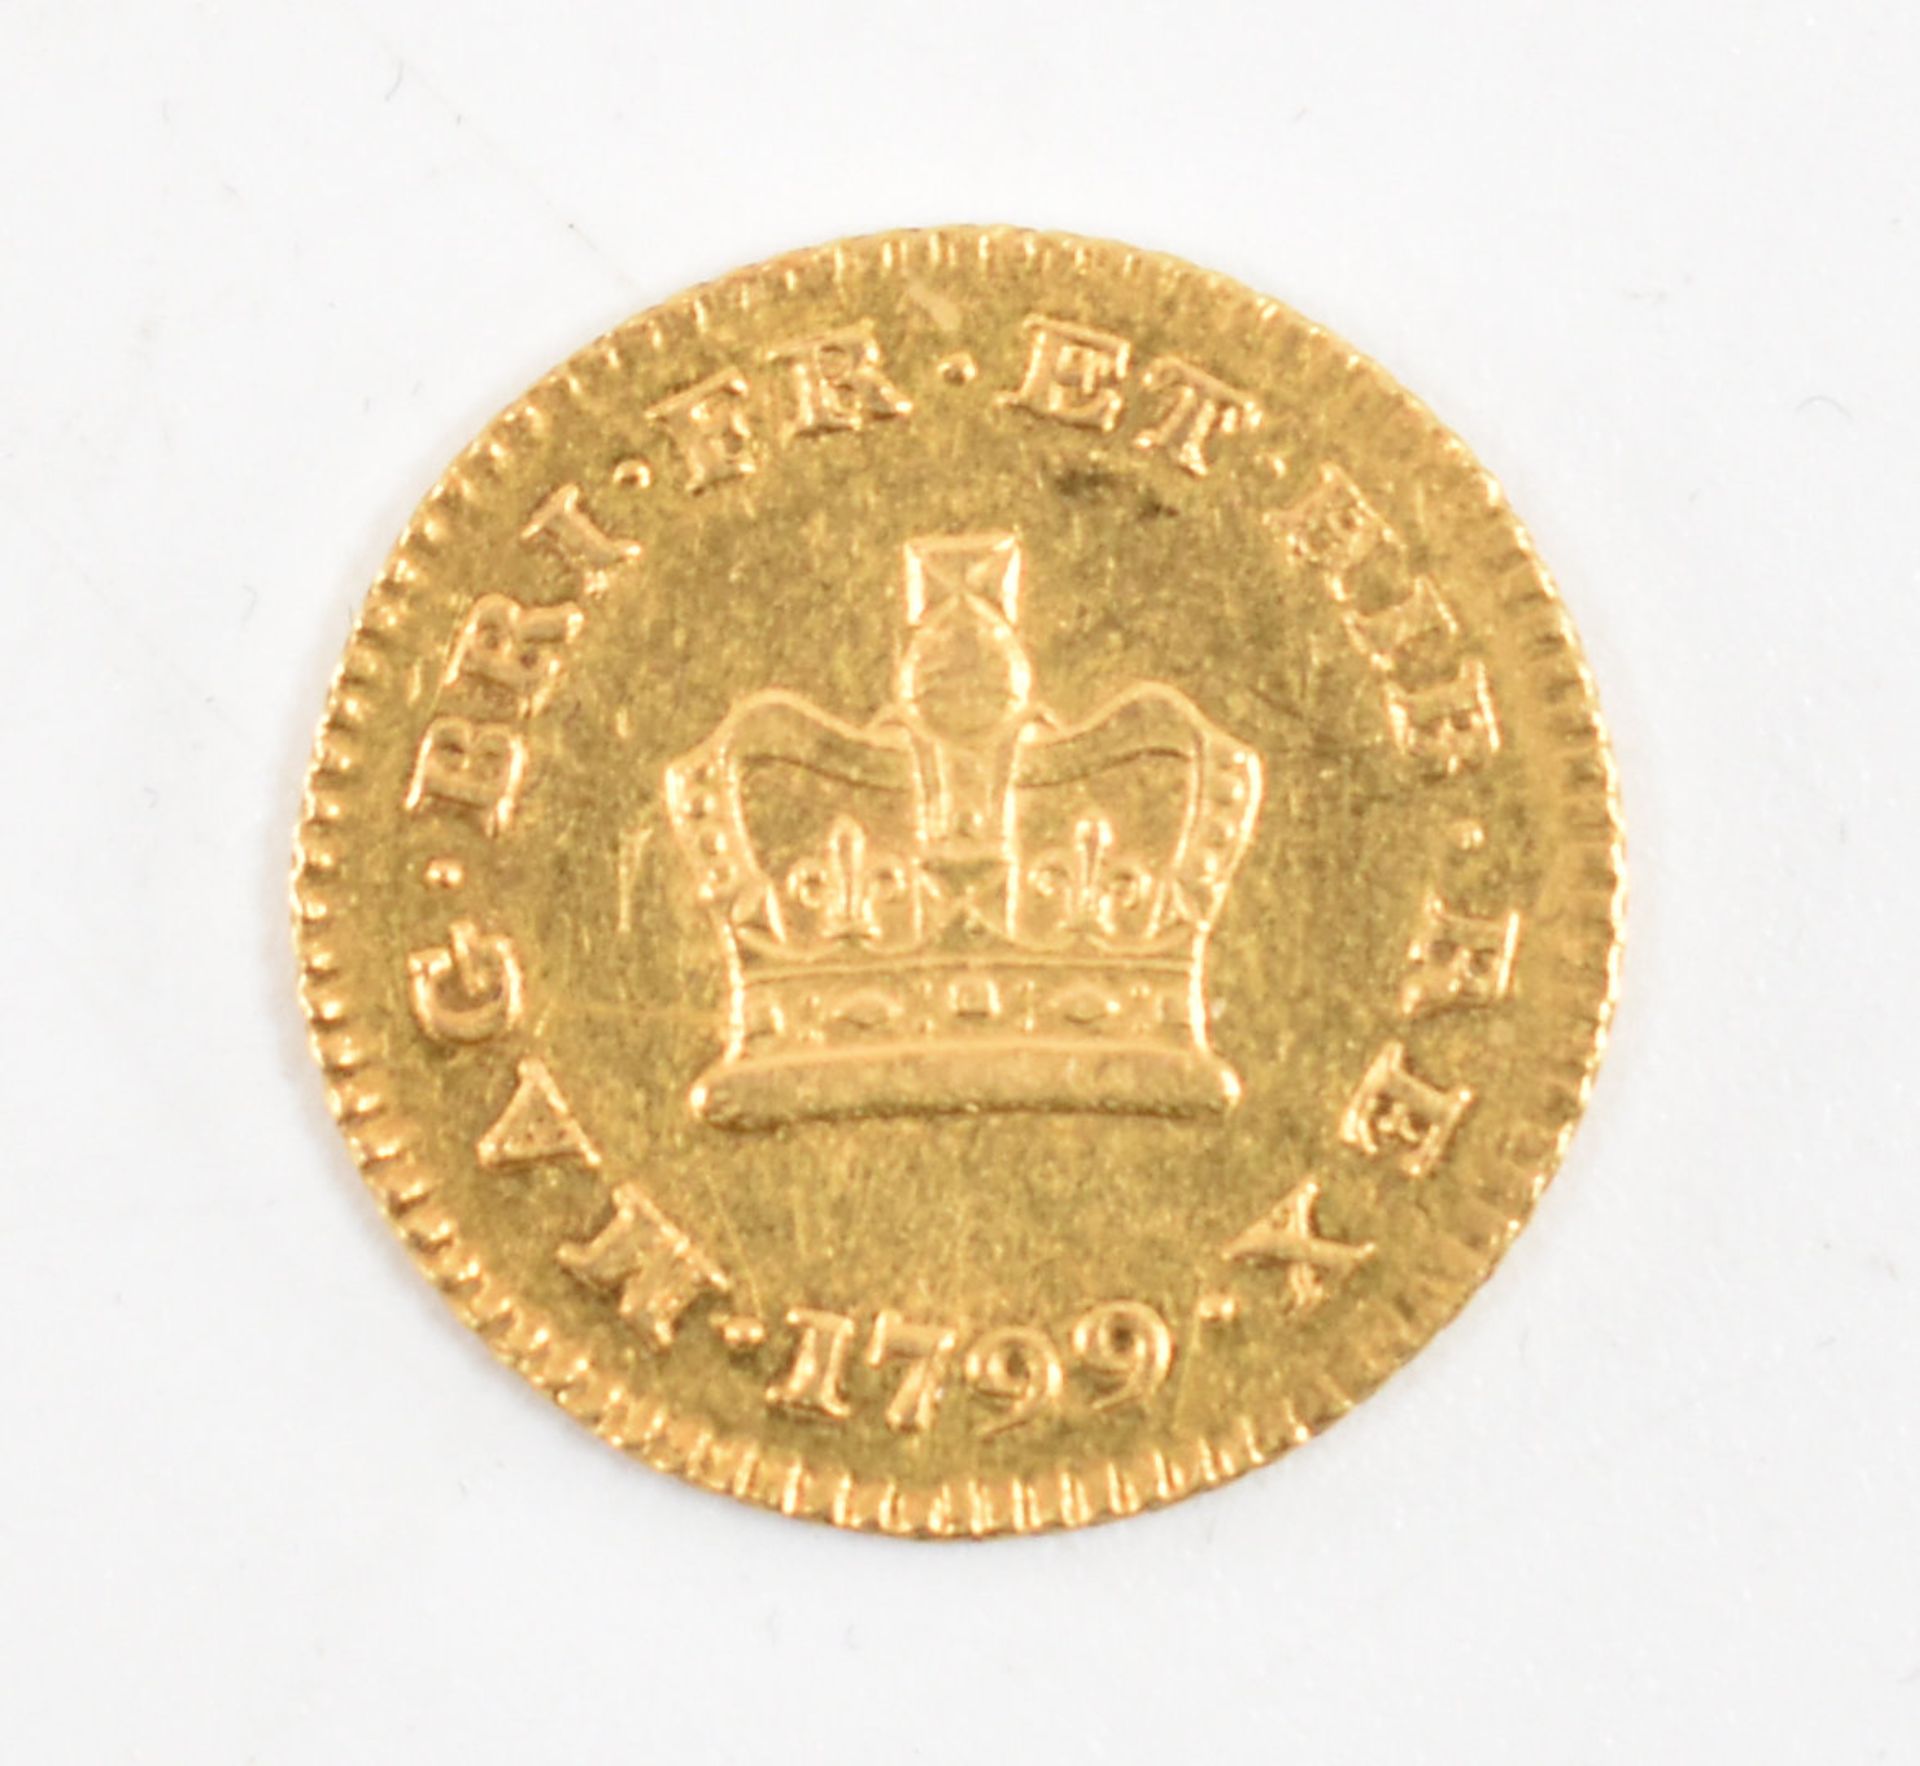 GEORGE III GOLD THIRD GUINEA 1799 COIN - Image 2 of 2